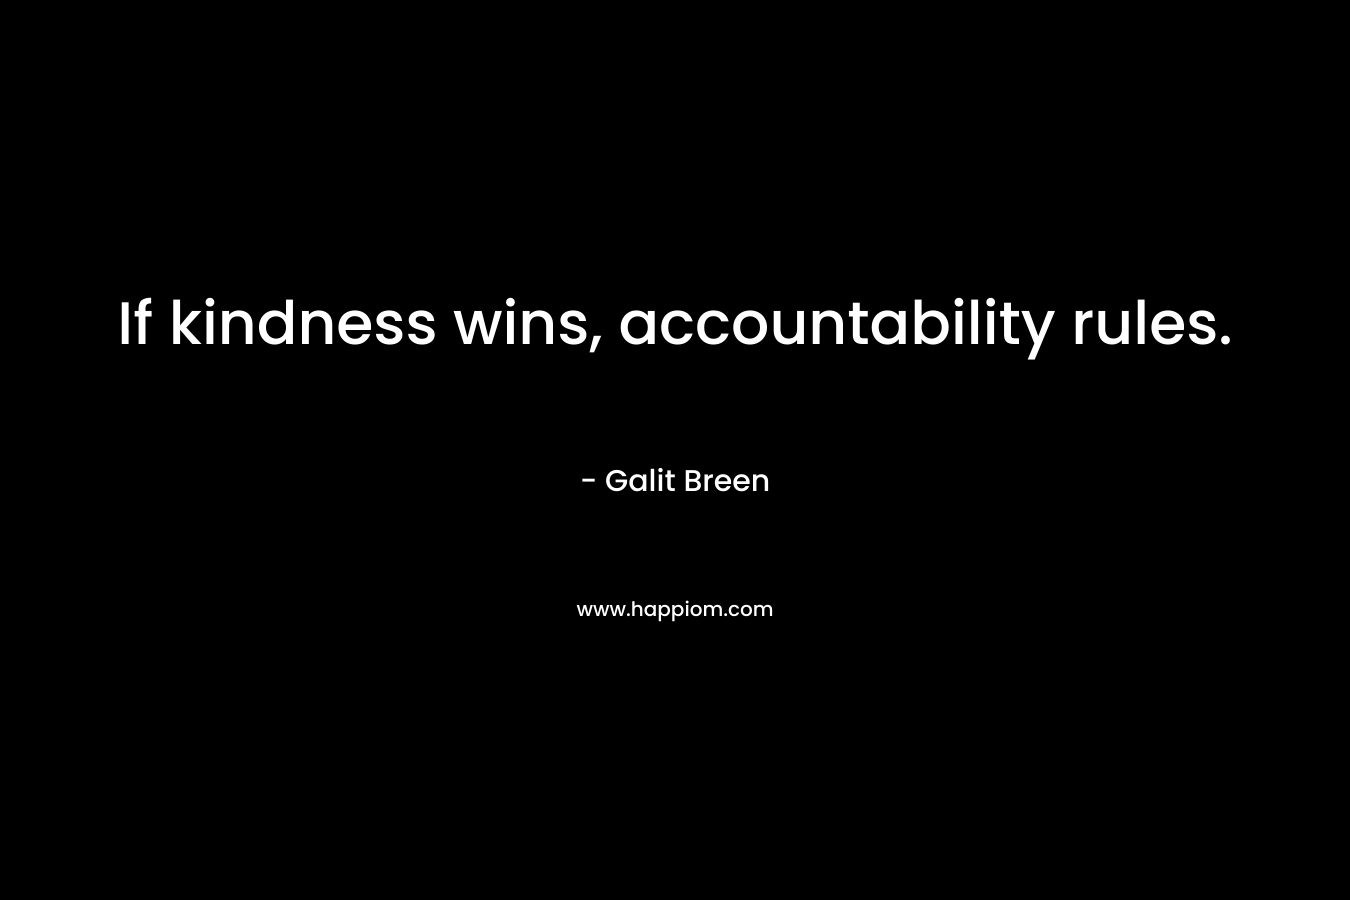 If kindness wins, accountability rules. – Galit Breen